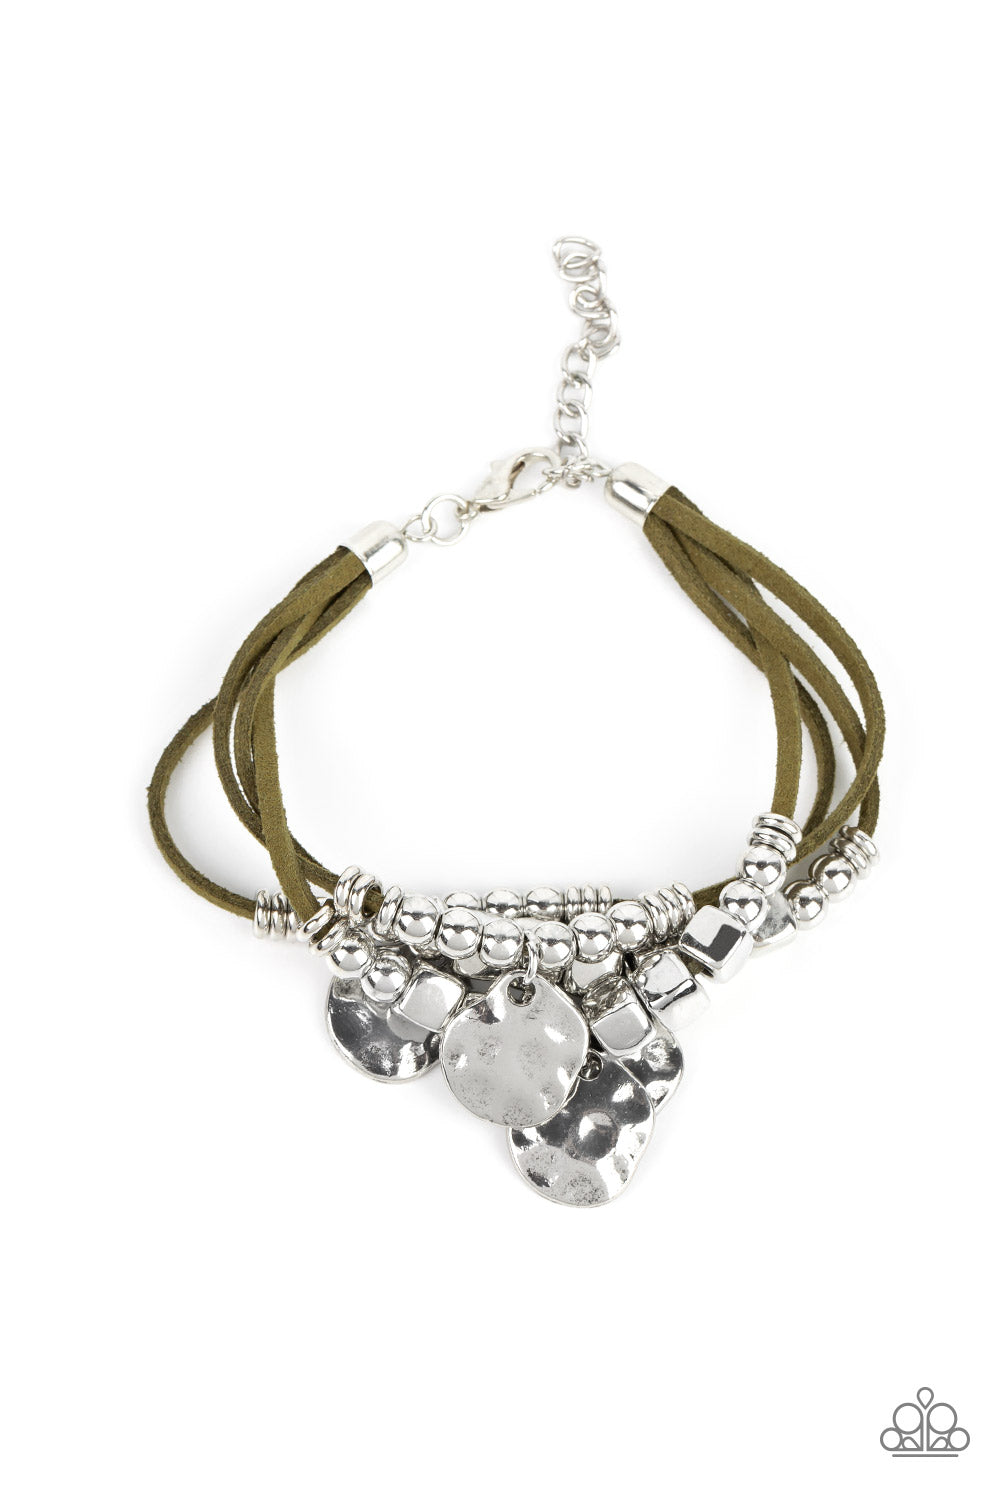 Asymmetrical, hammered silver discs swing from layers of Martini Olive suede that are adorned with silver discs, beads, and cubes, resulting in noisemaking shimmer around the wrist. Features an adjustable clasp closure.  Sold as one individual bracelet.